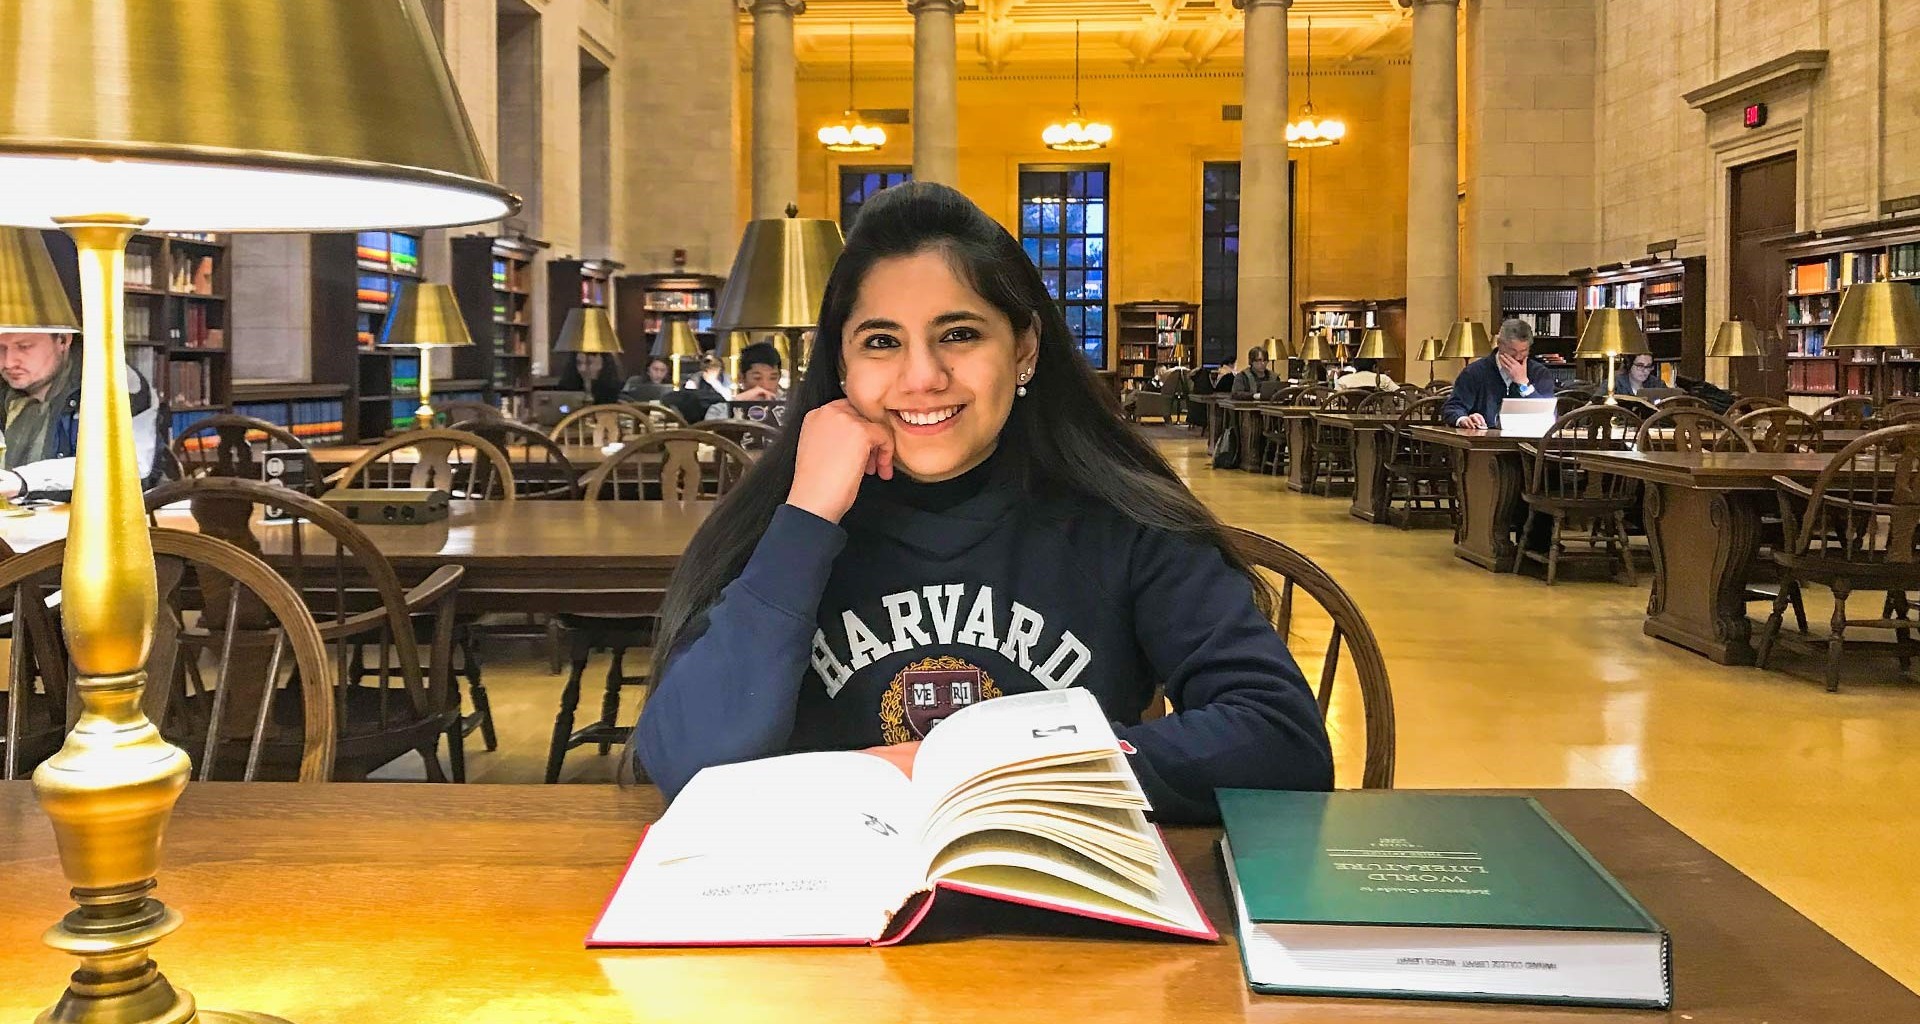 She finished her master when she was 16. Now she’s going to Harvard